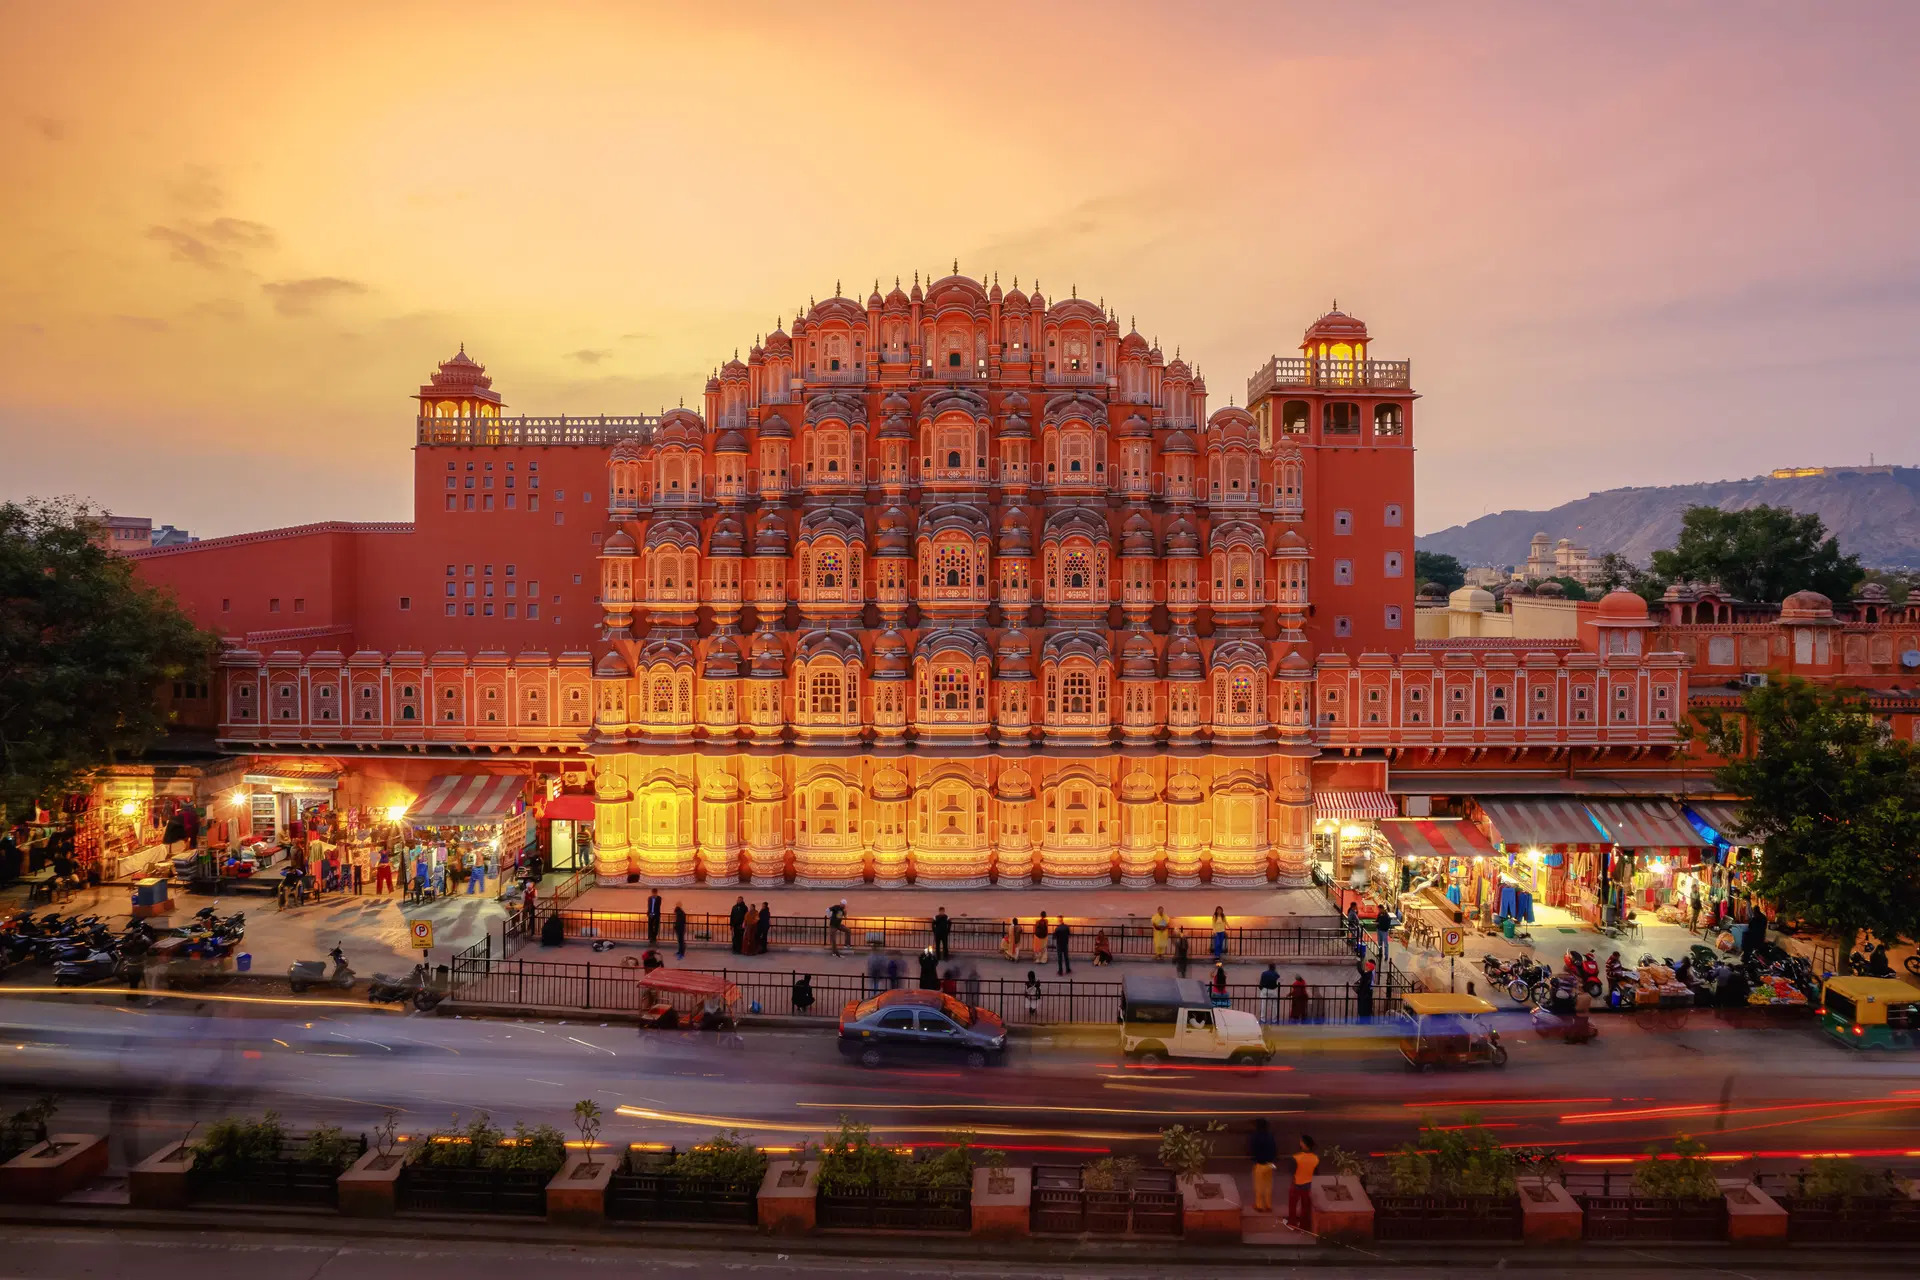 Ajmer & Golden Triangle Expedition - Discovering Heritage & Culture